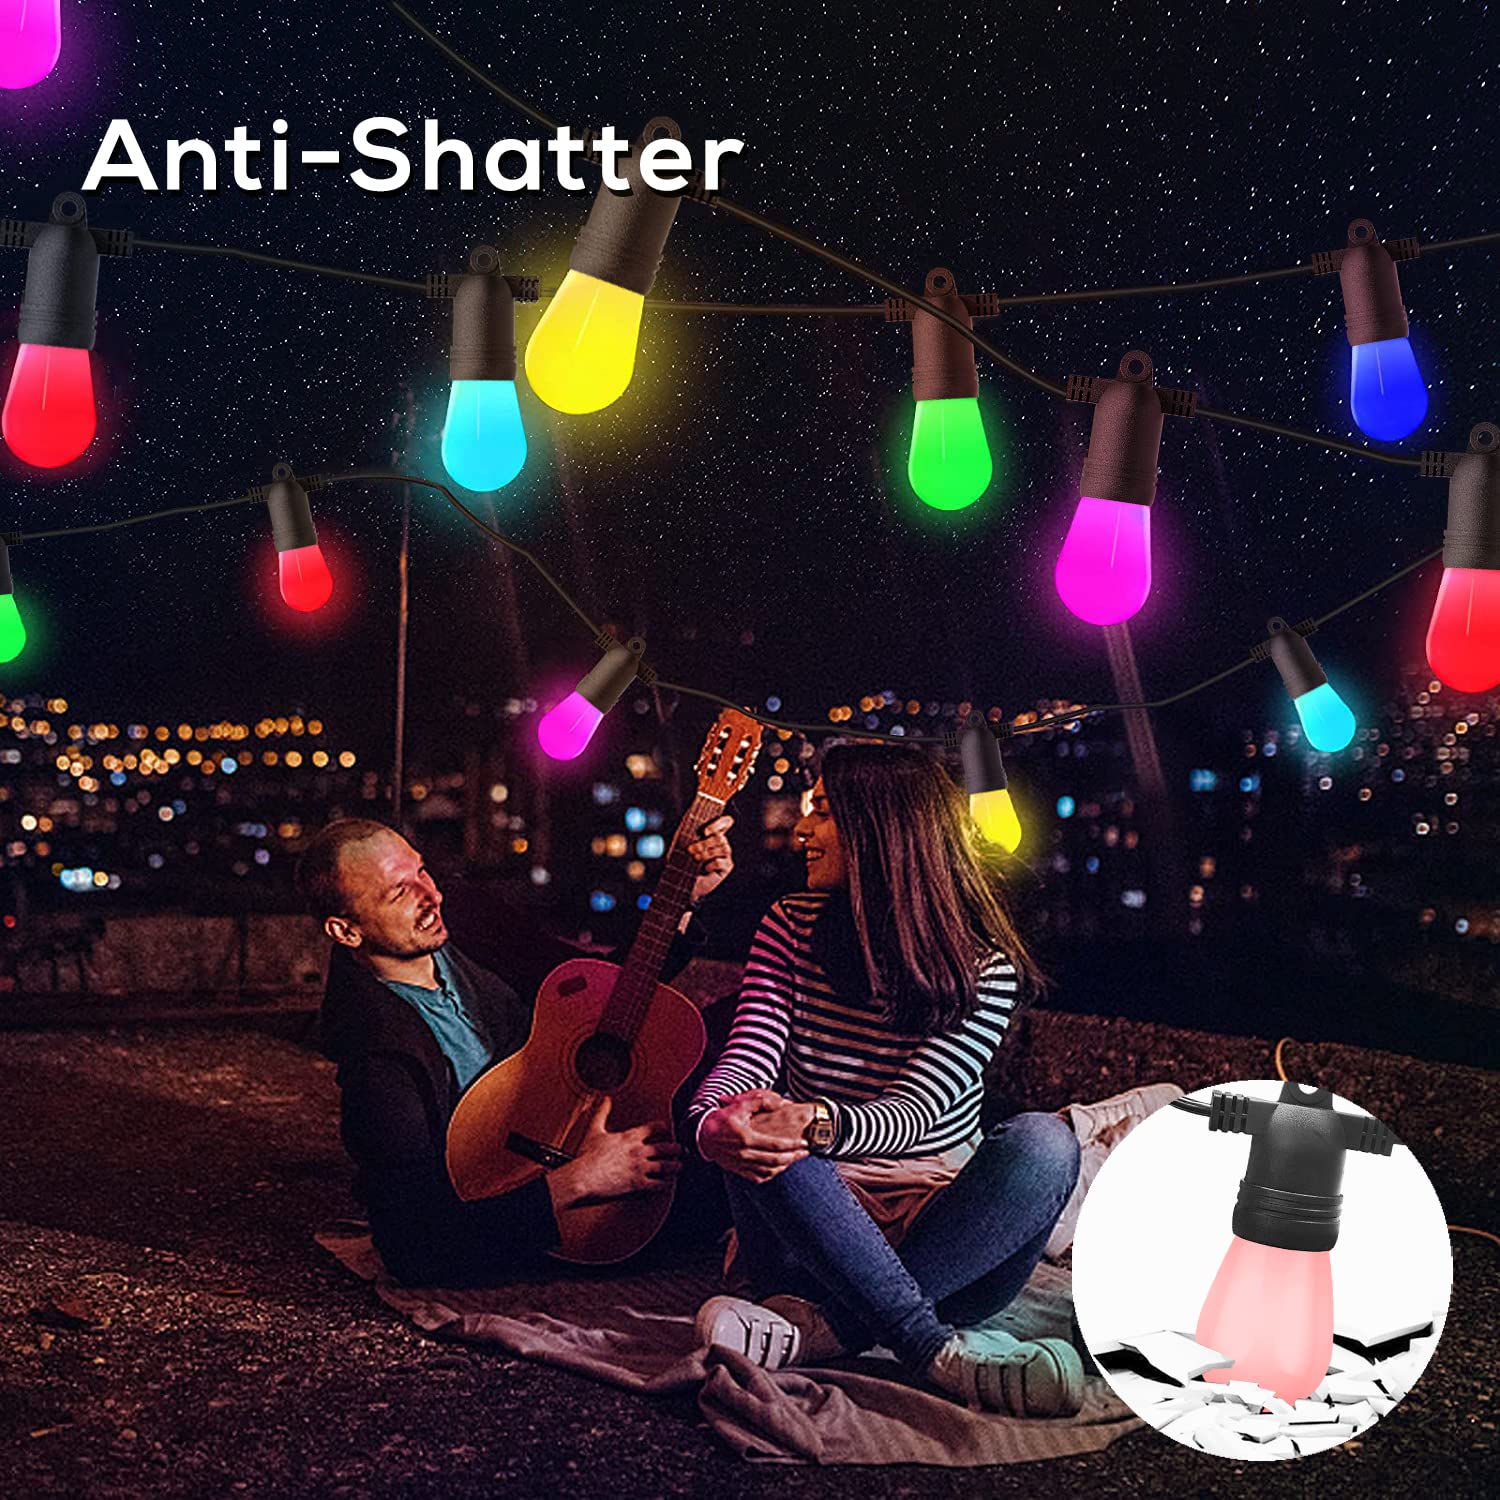 SUNTHIN Smart String Lights, 100FT Colored Patio Lights Work with Alexa & Google Assistant, 30 Shatterproof RGBW Bulbs, Waterproof Hanging Lights for Outdoor Patio, Backyard, Porch, Deck, Pool, Party